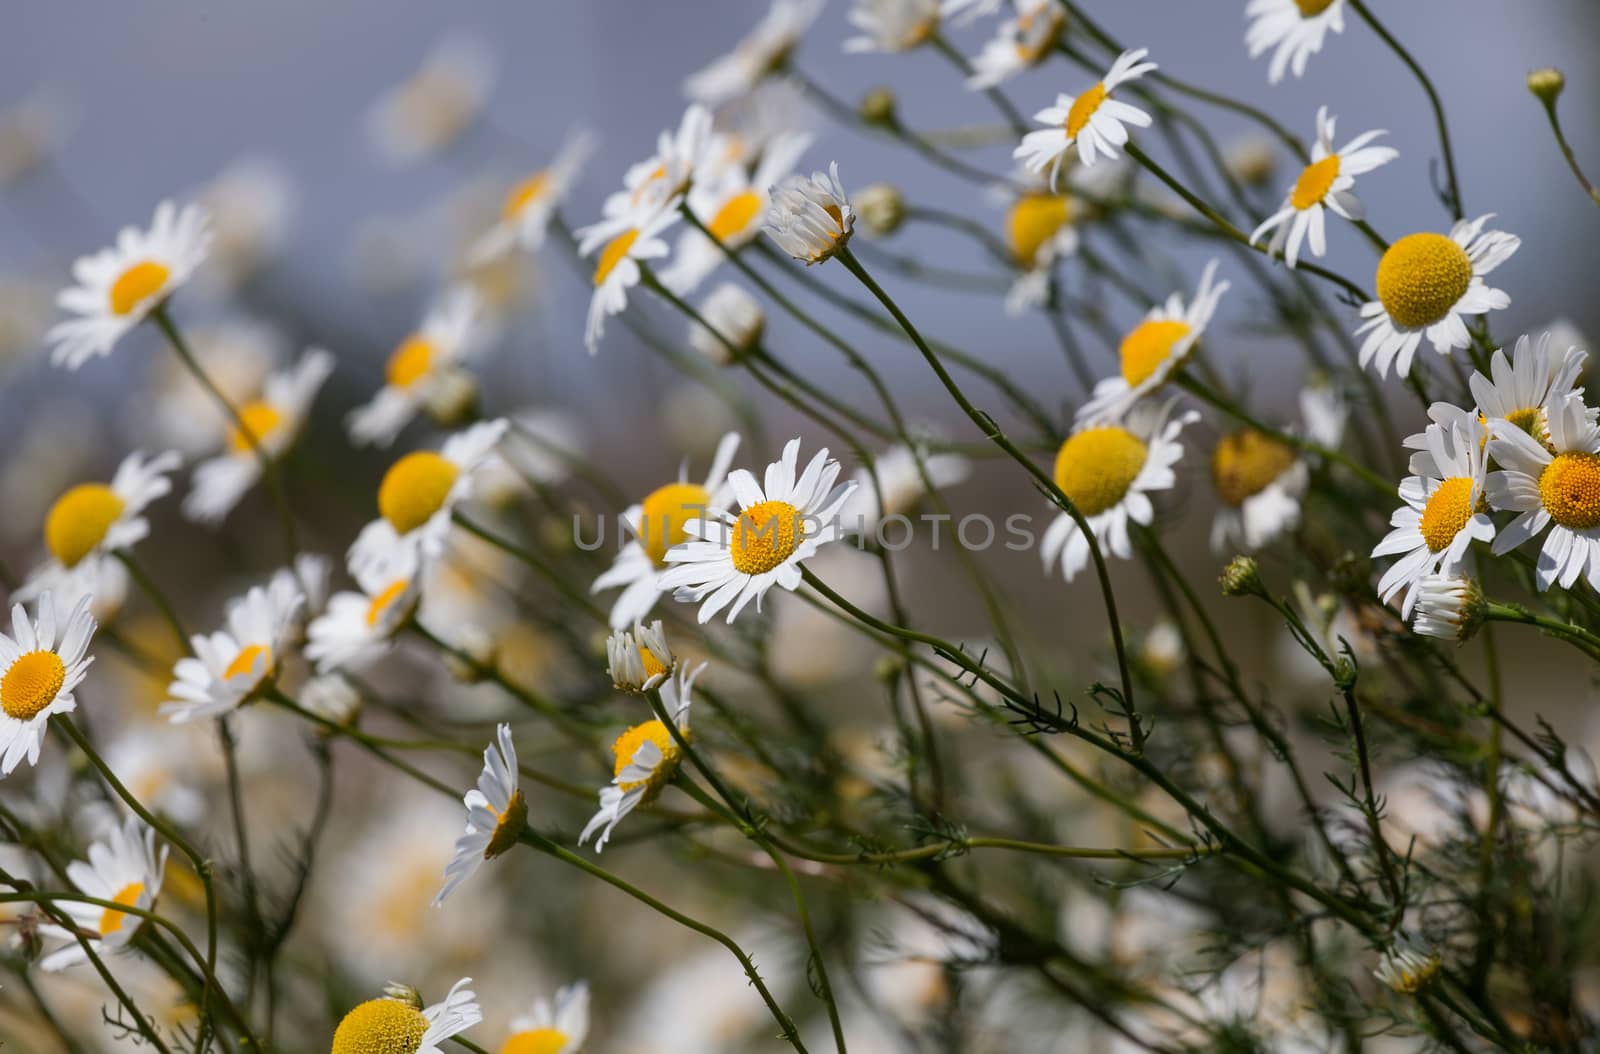 Daisies against the blue sky by fogen